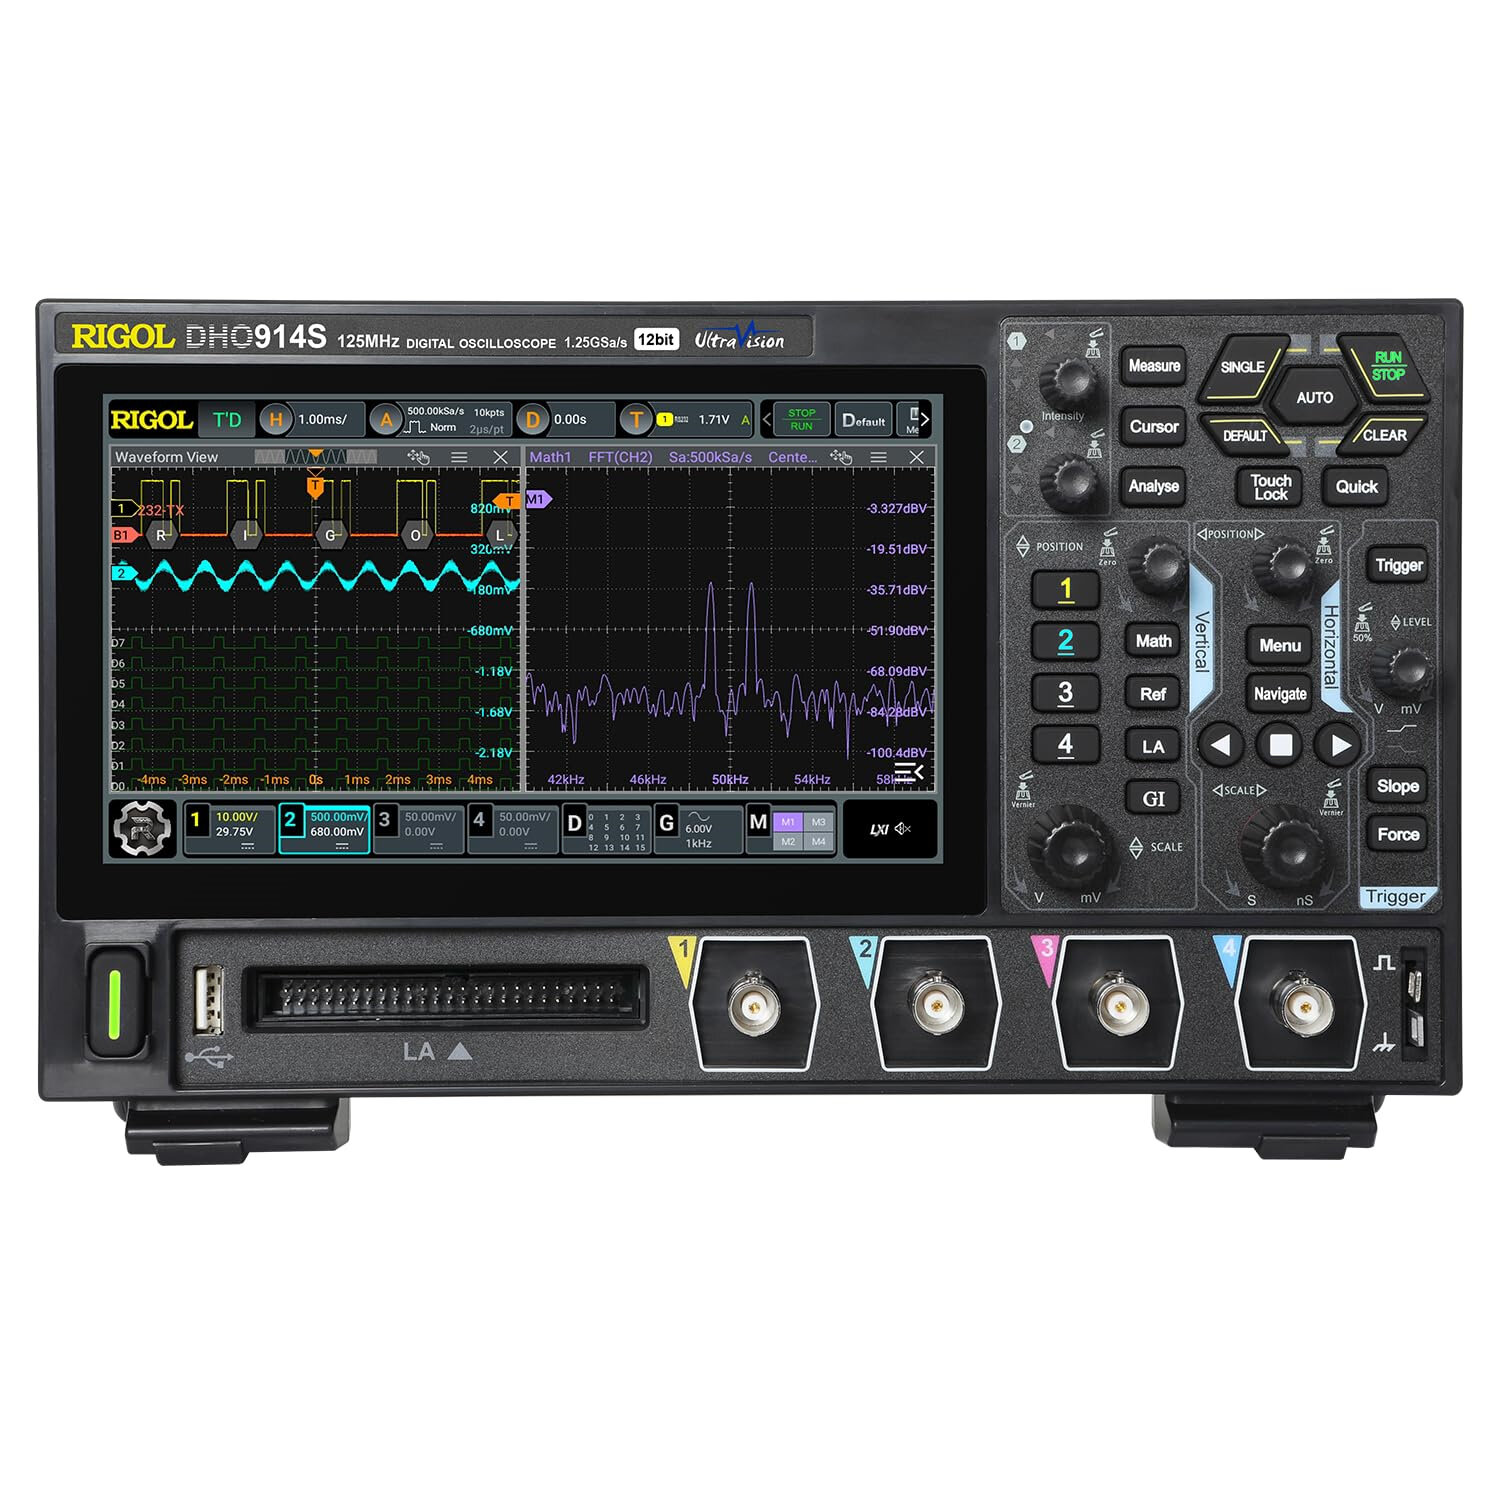 

DHO914S Digital Oscilloscope 125MHz Frequency Band 4 Analog Channels 12-bit Vertical Resolution 1.25 GSa/s Sample Rate w